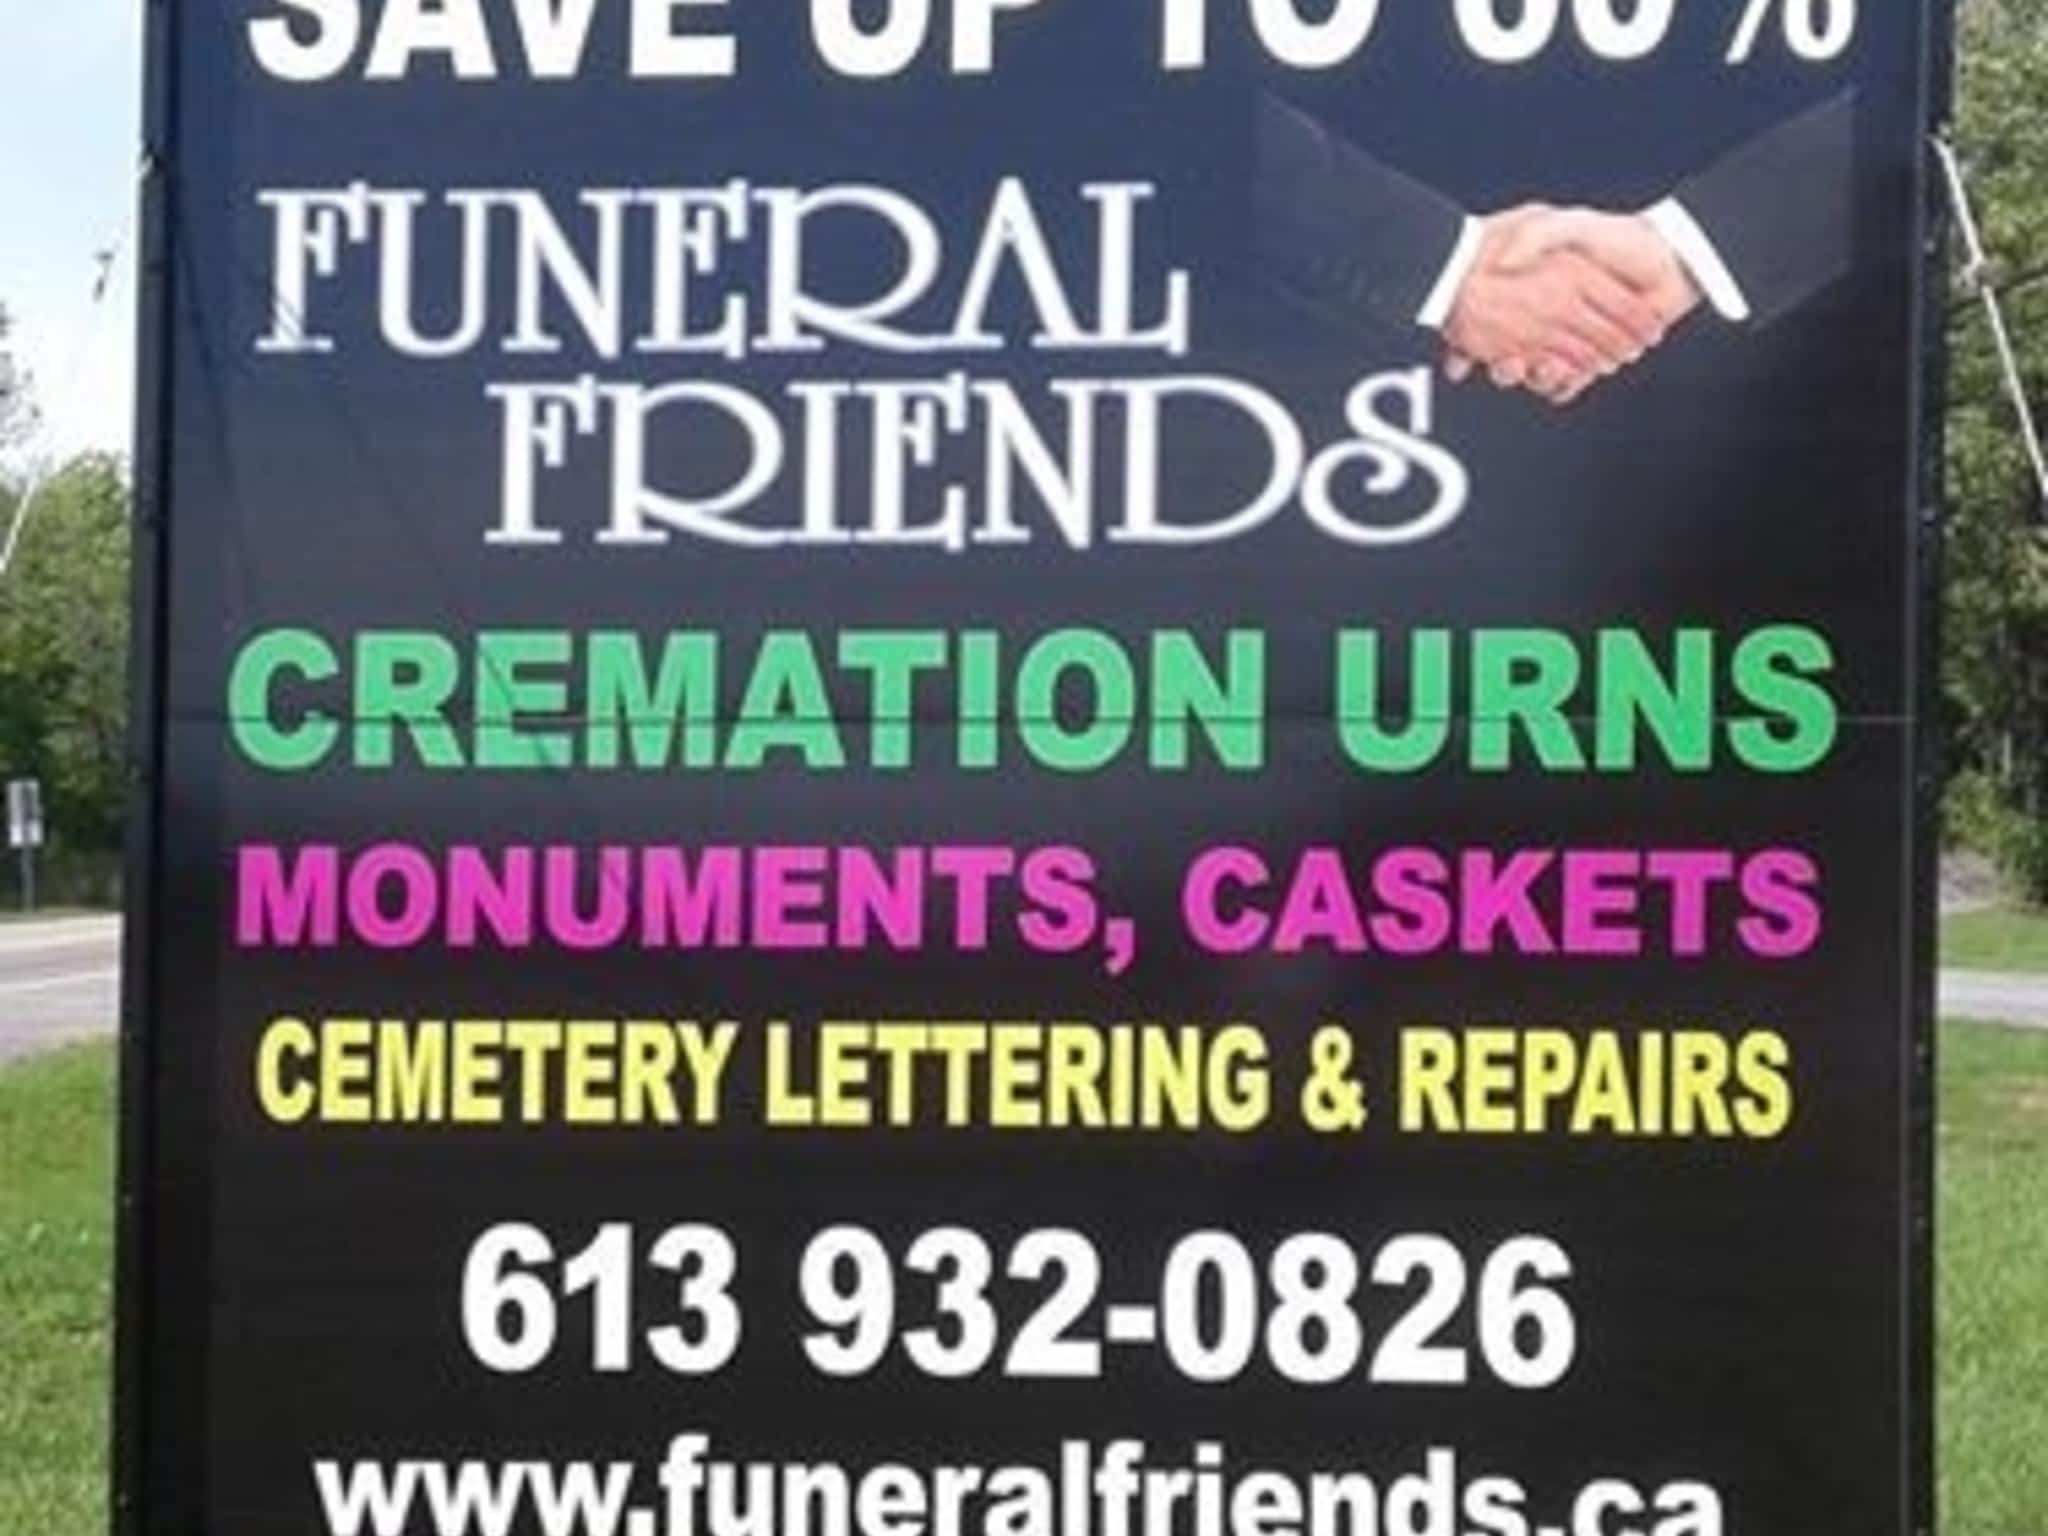 photo Funeral Friends